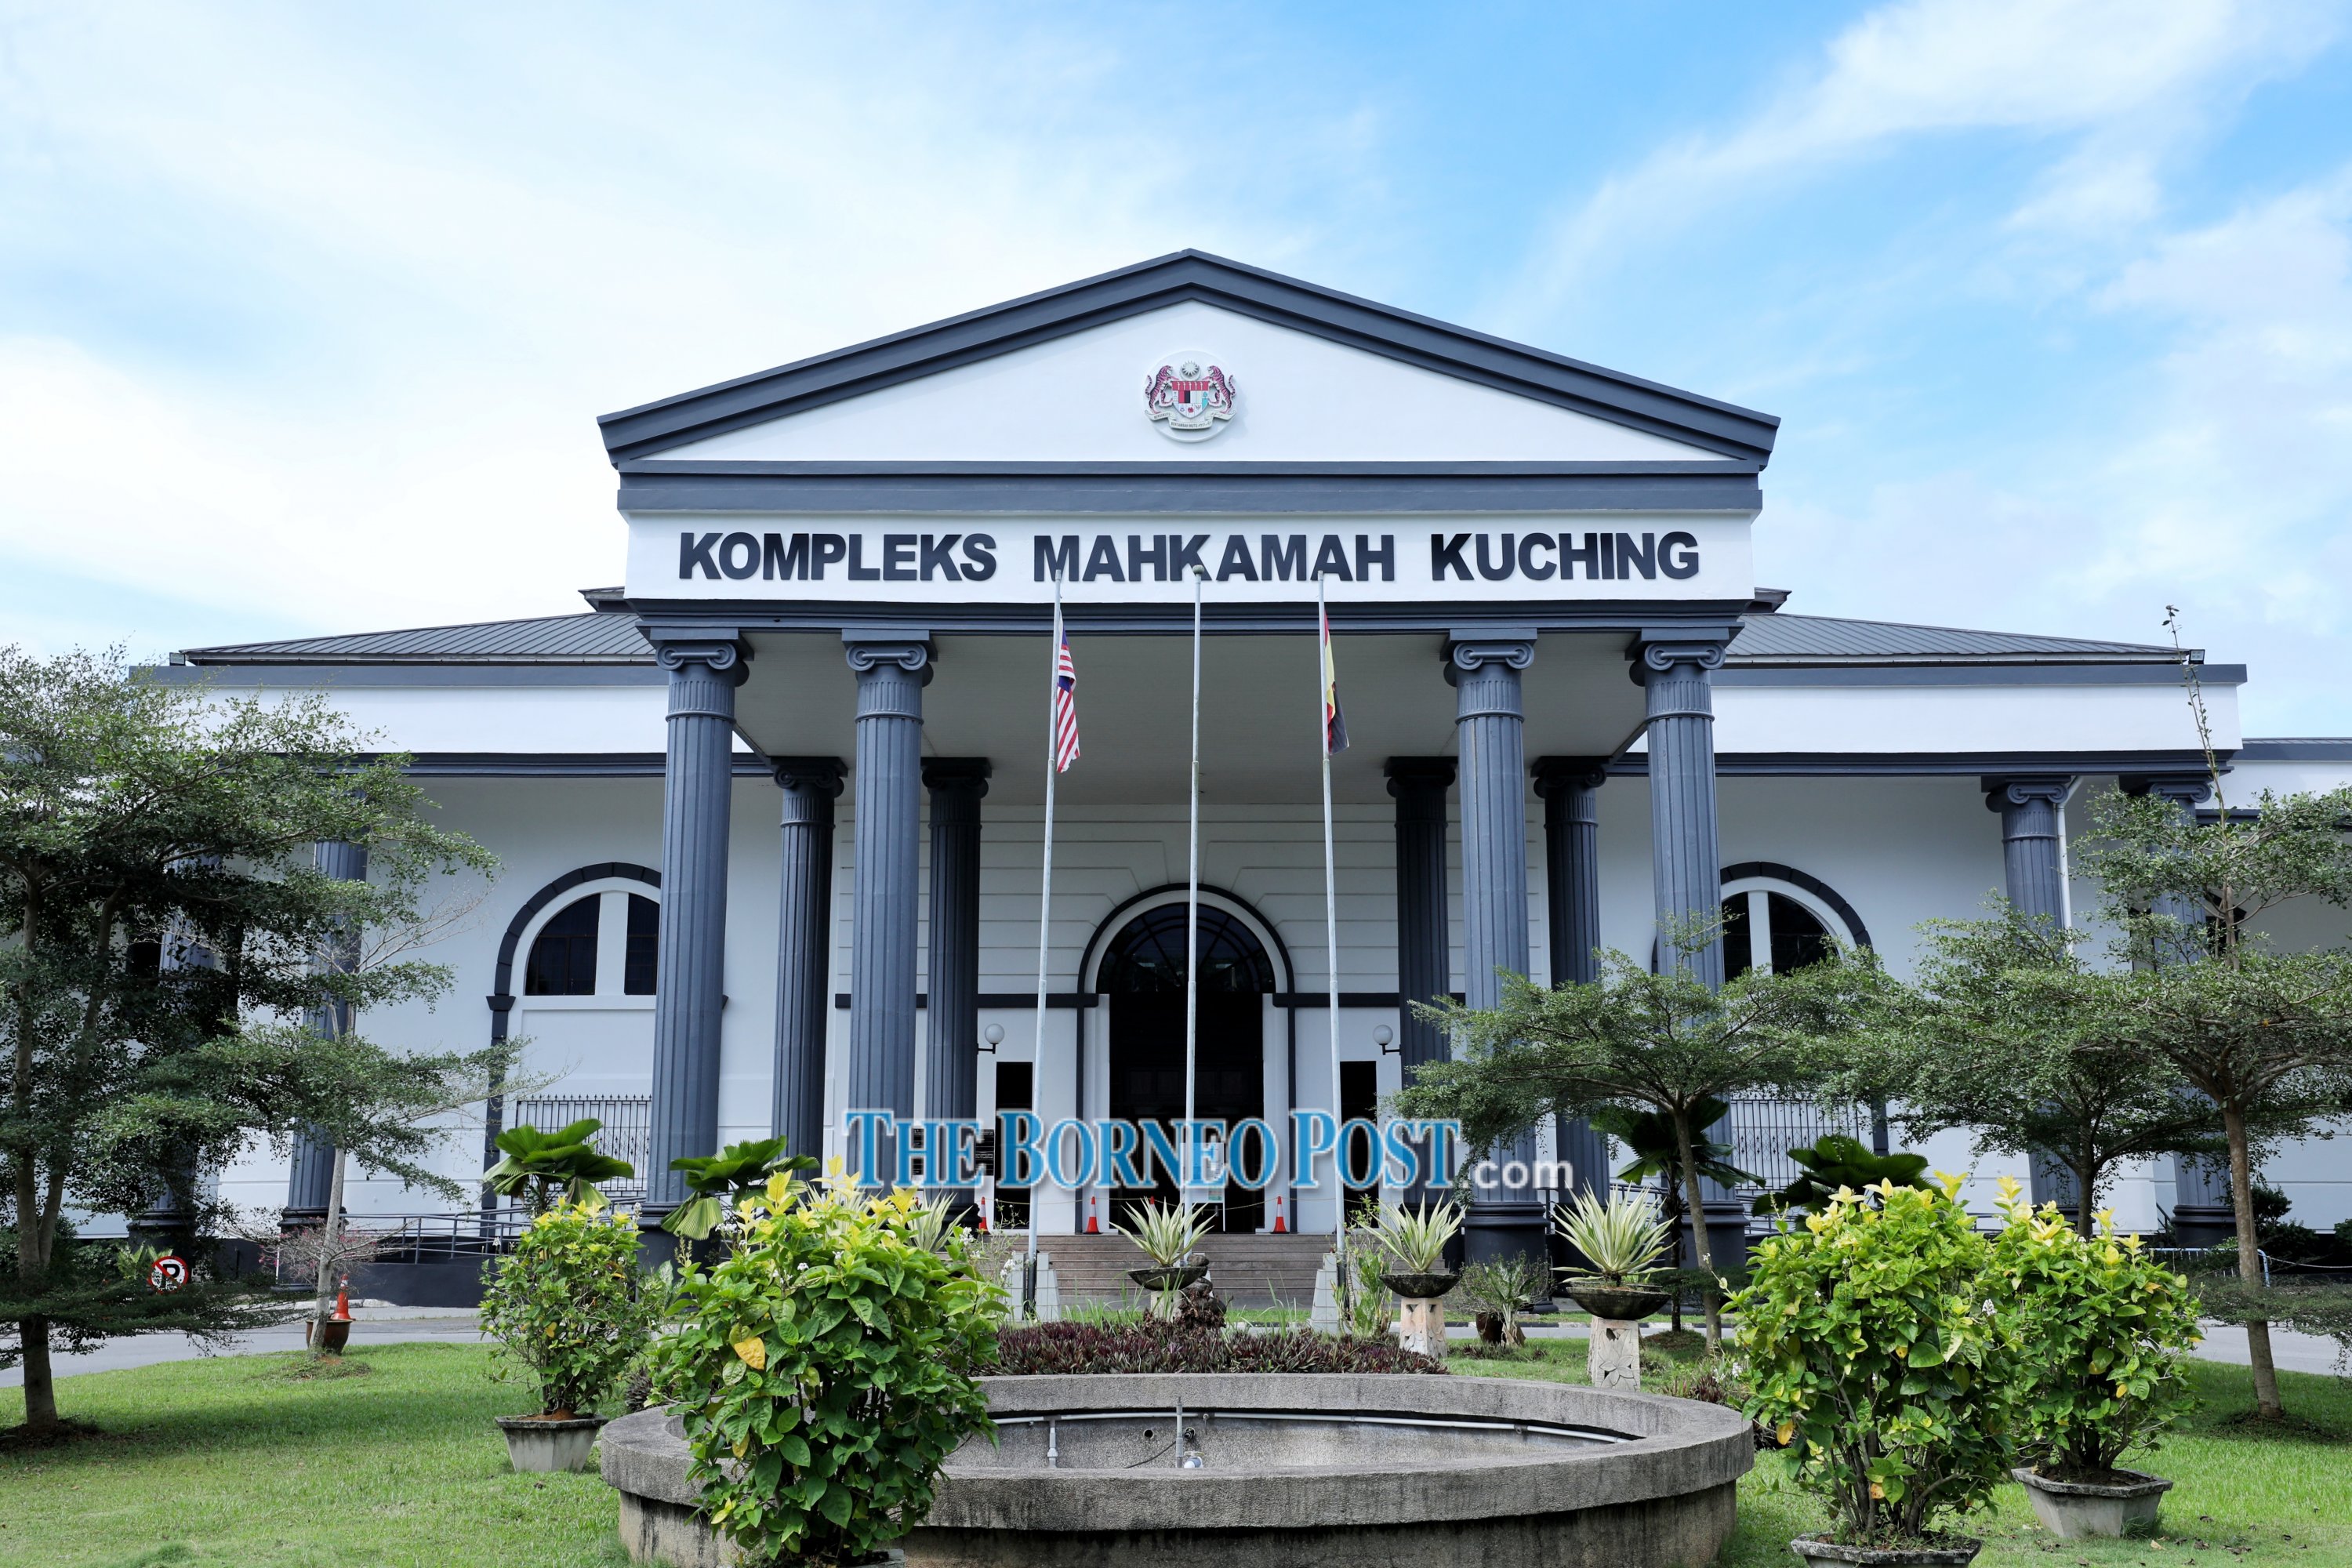 Kuching man jailed seven months for hurting father-in-law, fined for abusing drugs